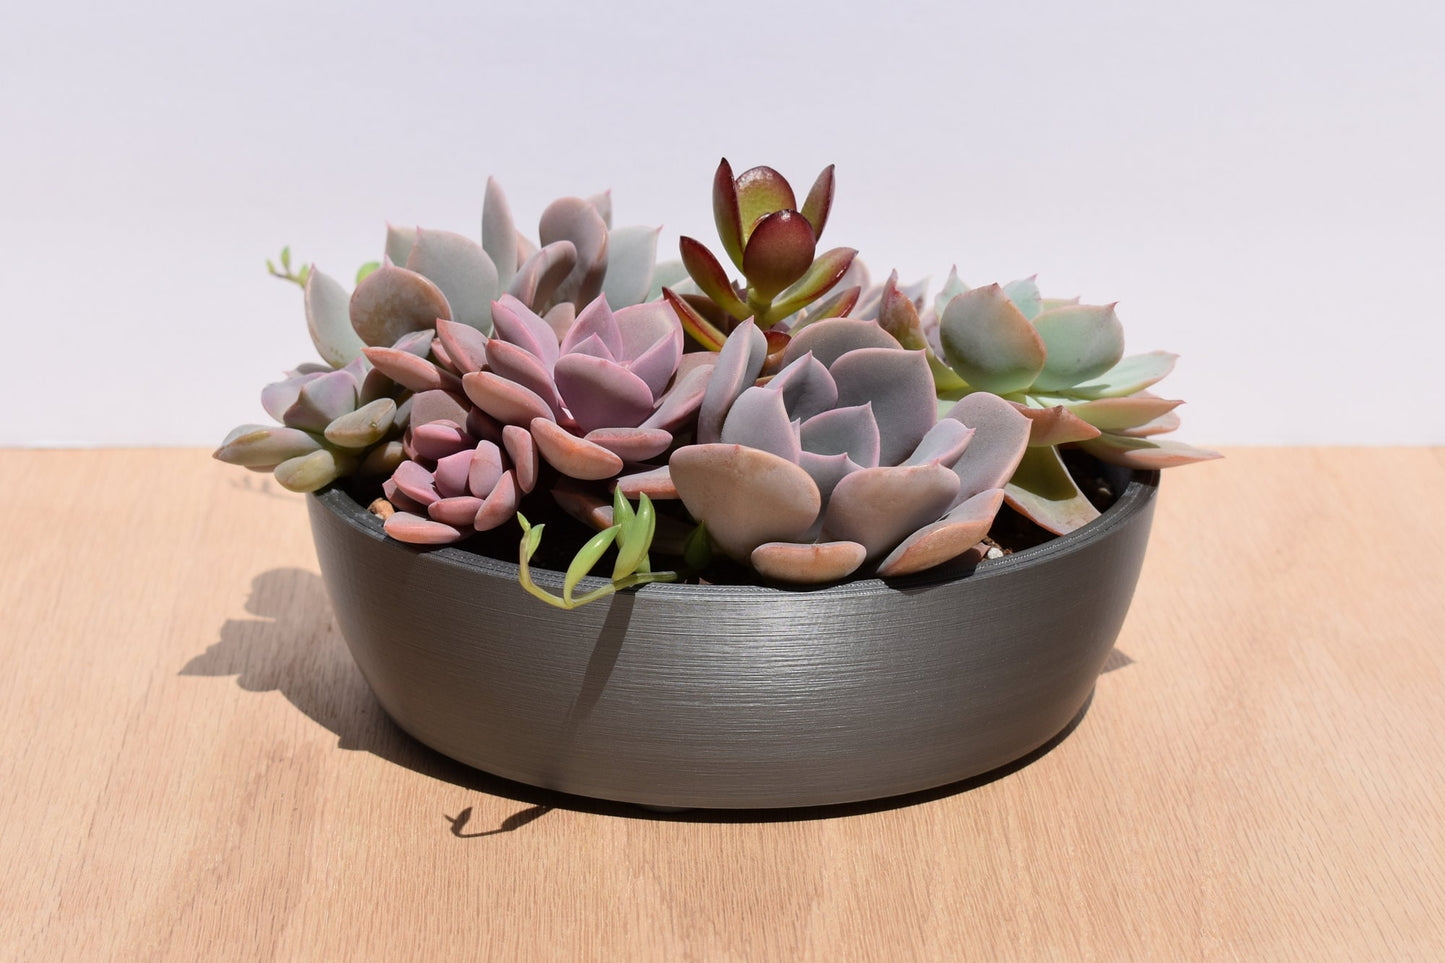 6-inch Round Shallow Succulent Planter with Drainage, Indoors or Out, Optional Drip Tray